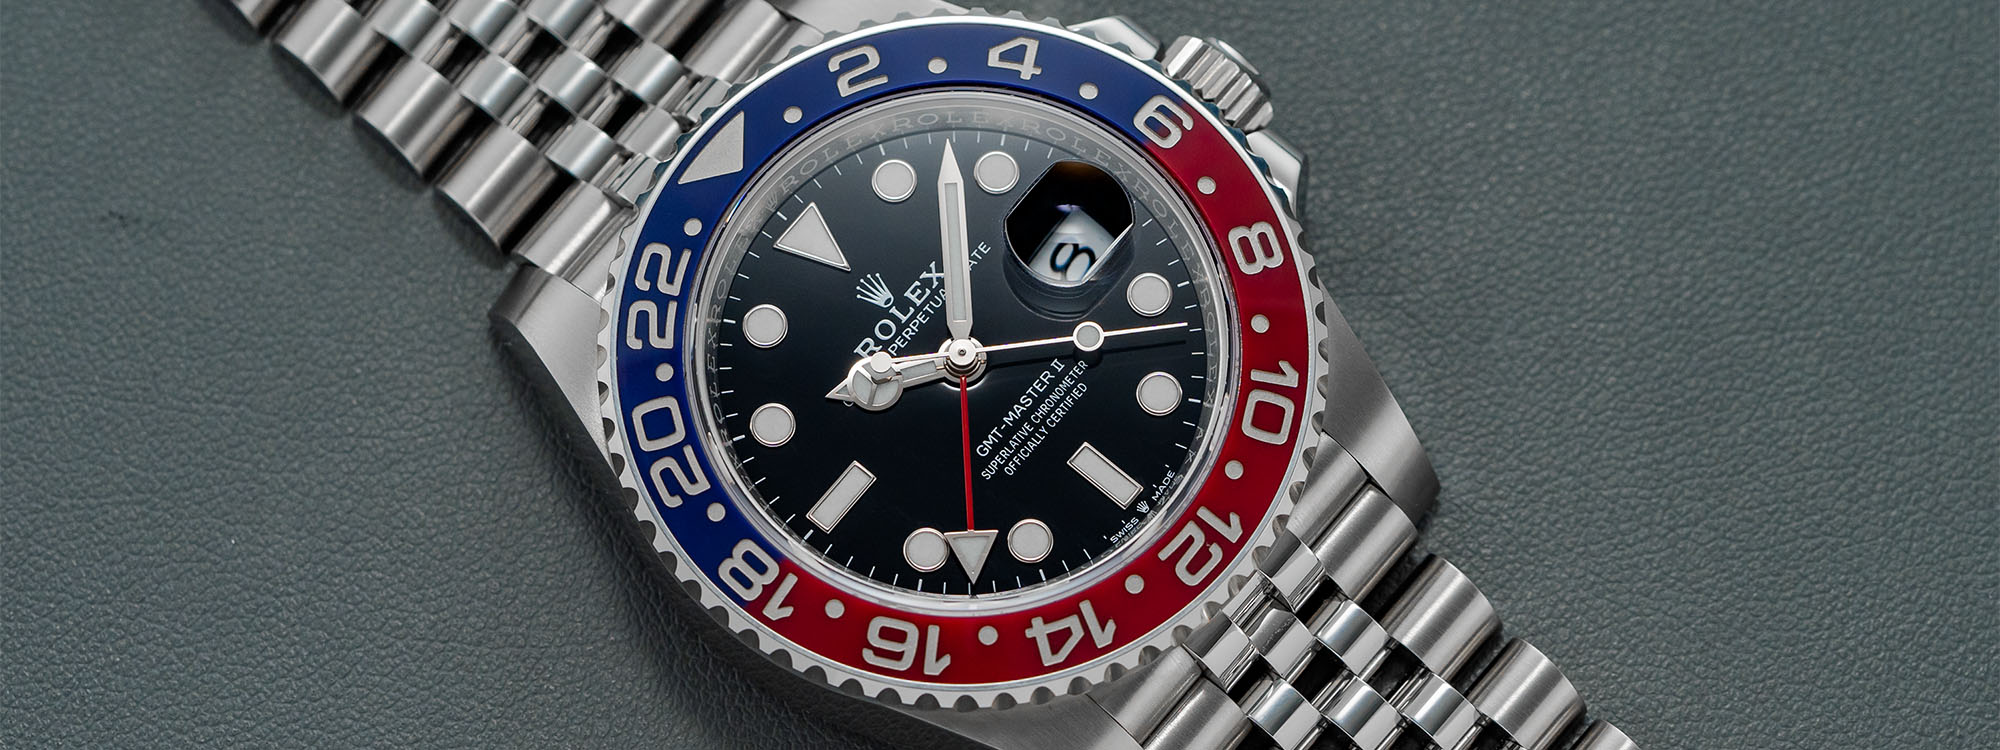 Rolex Logo: The Complete Story Behind The Iconic Crown - The Watch Company